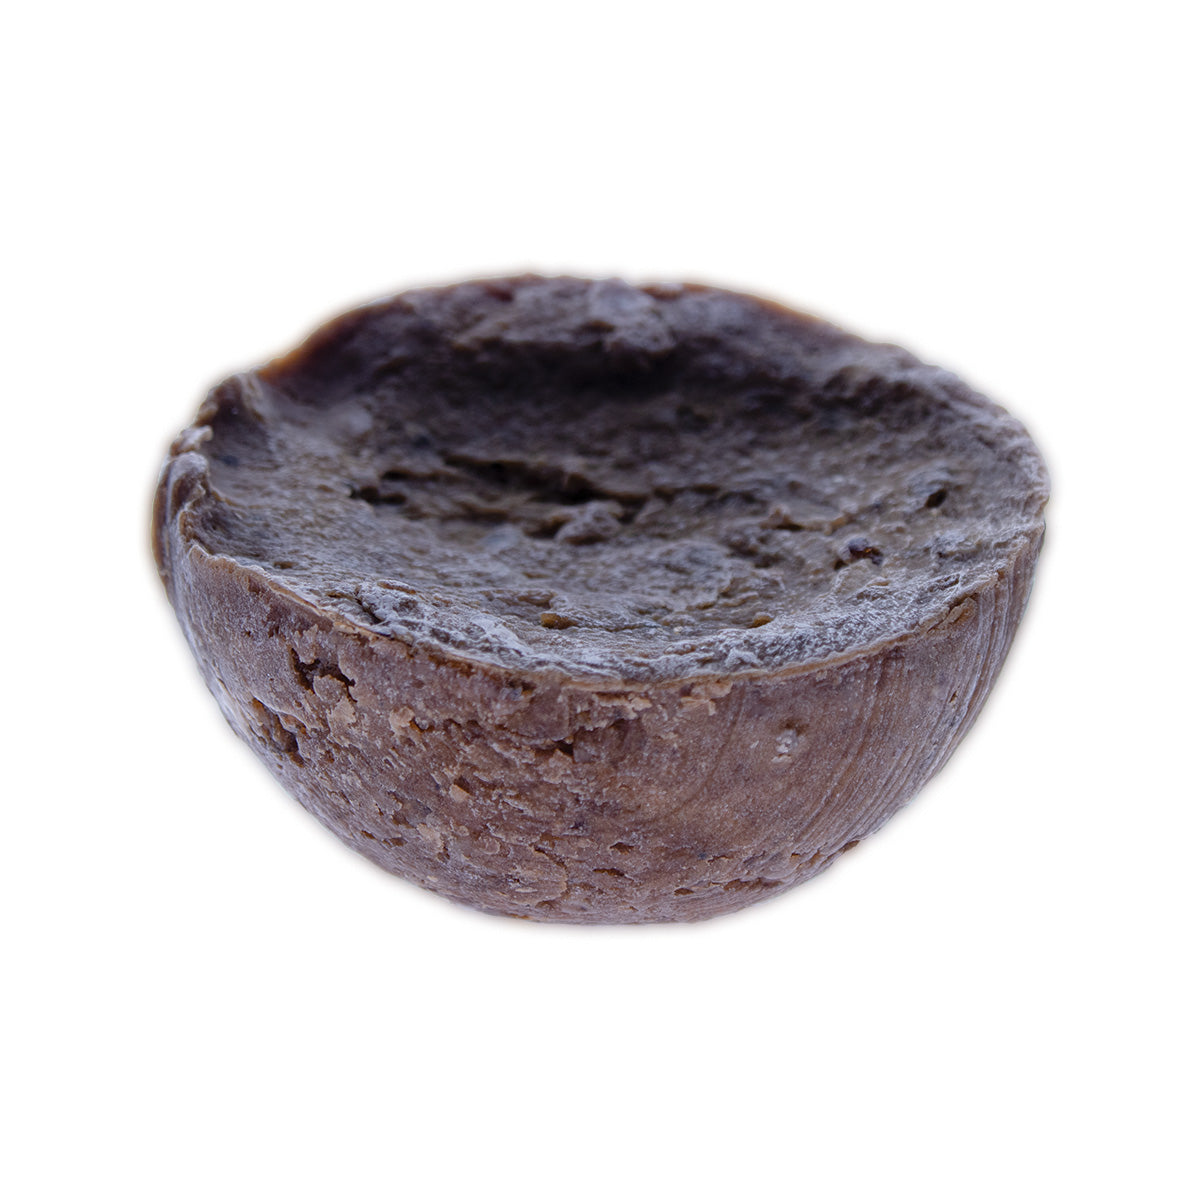 African Black Soap Shampoo Bar Cleanser Soap Care